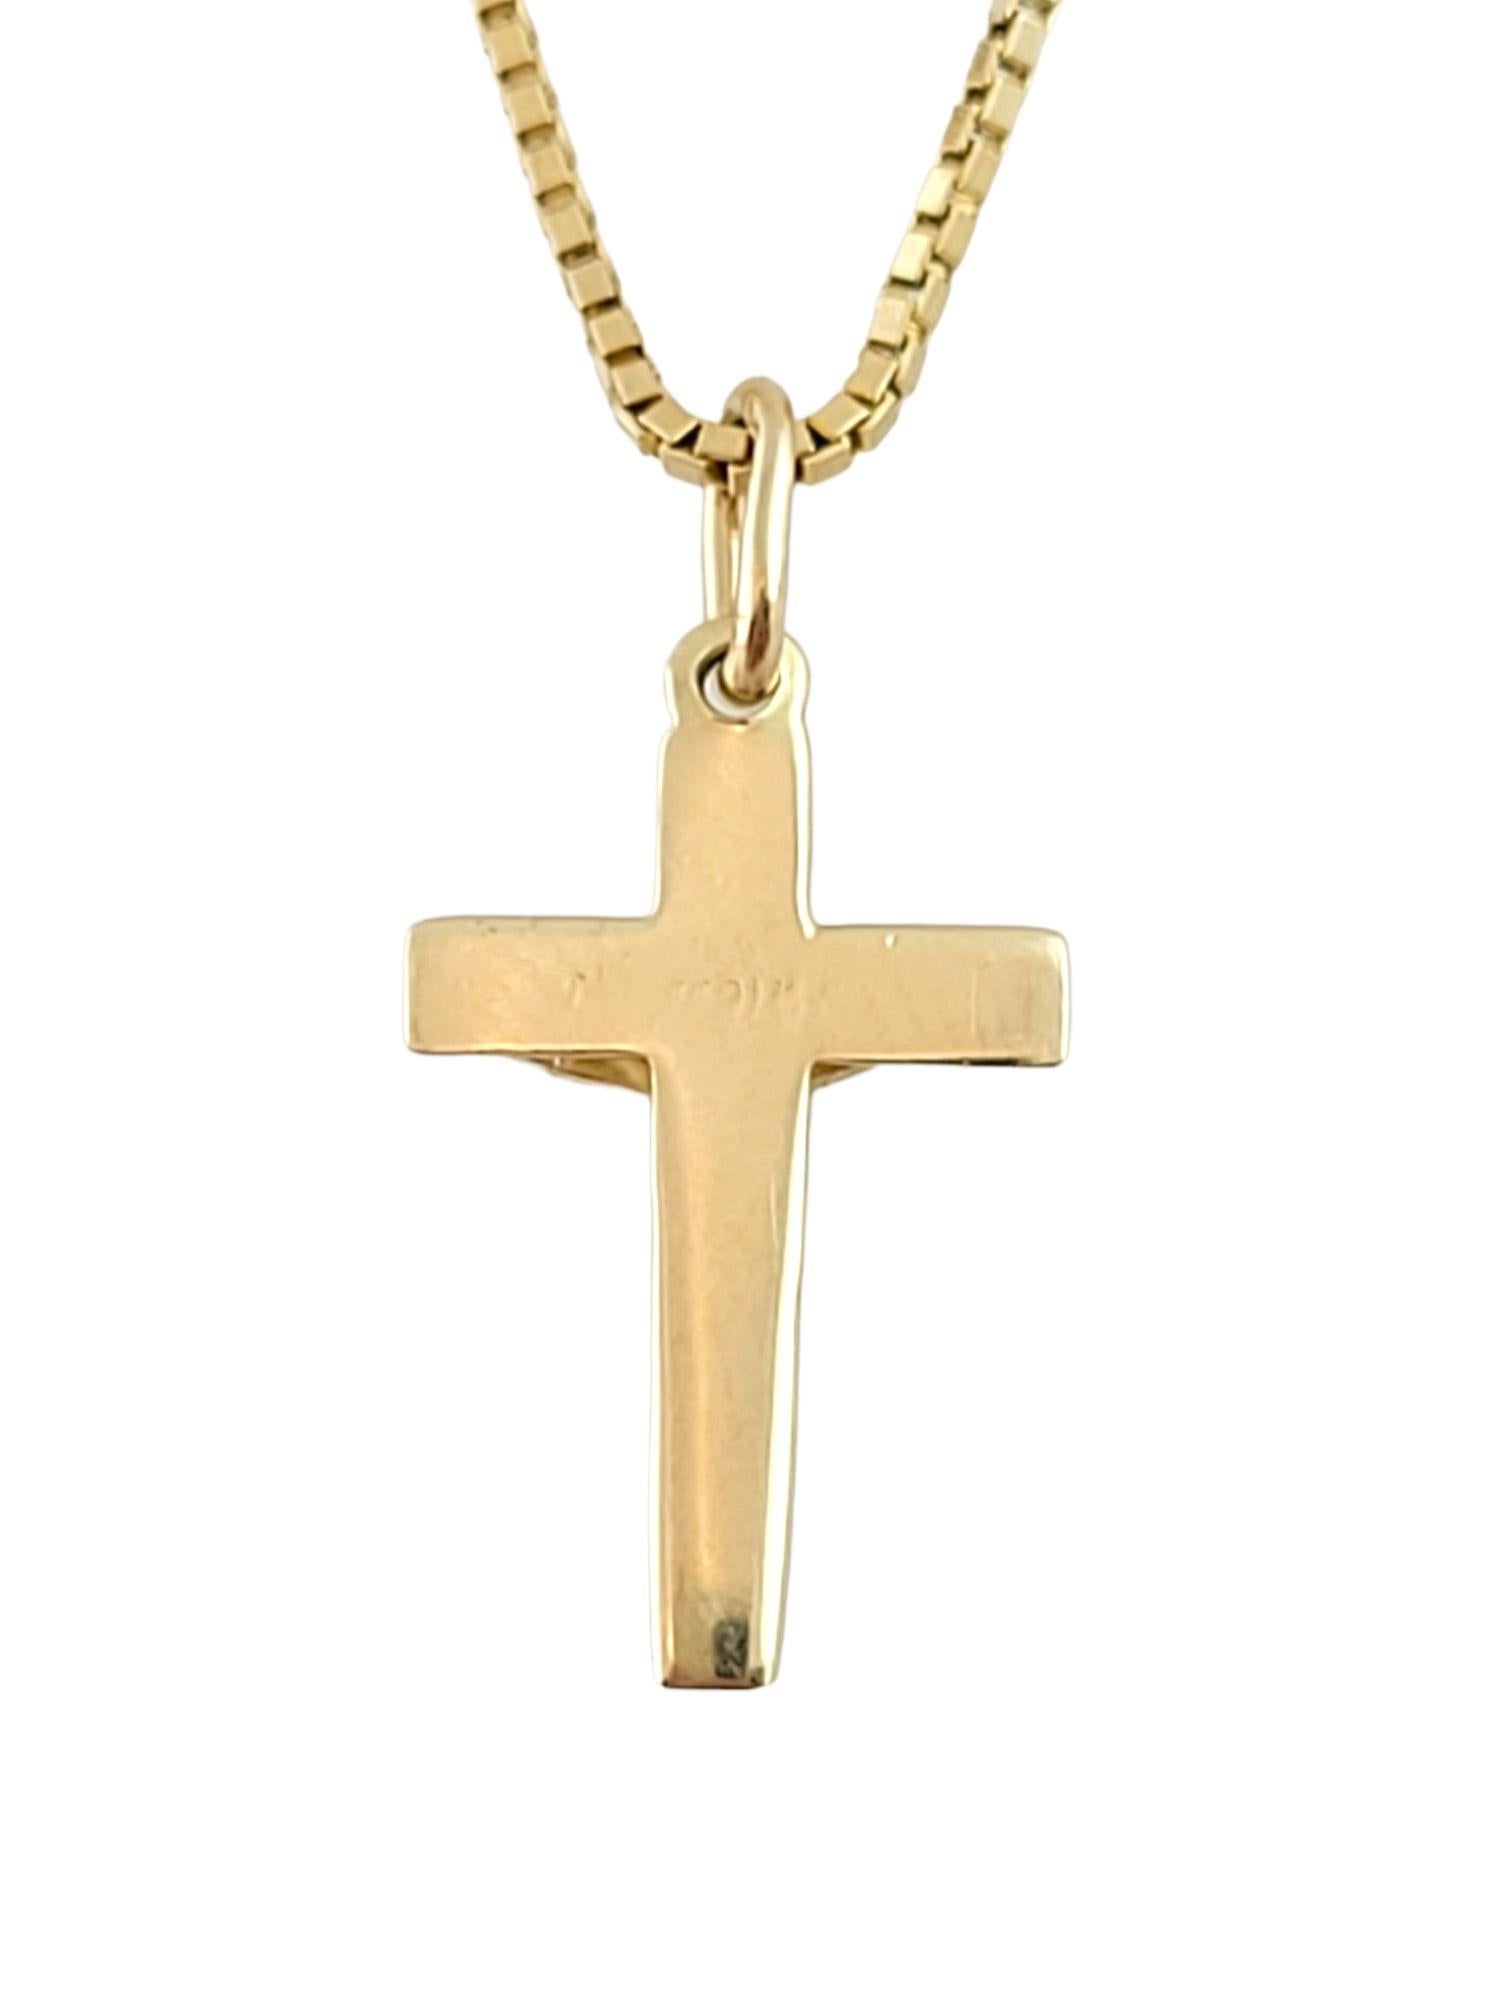 Women's 14K Yellow Gold Box Chain with Cross Pendant #14870 For Sale